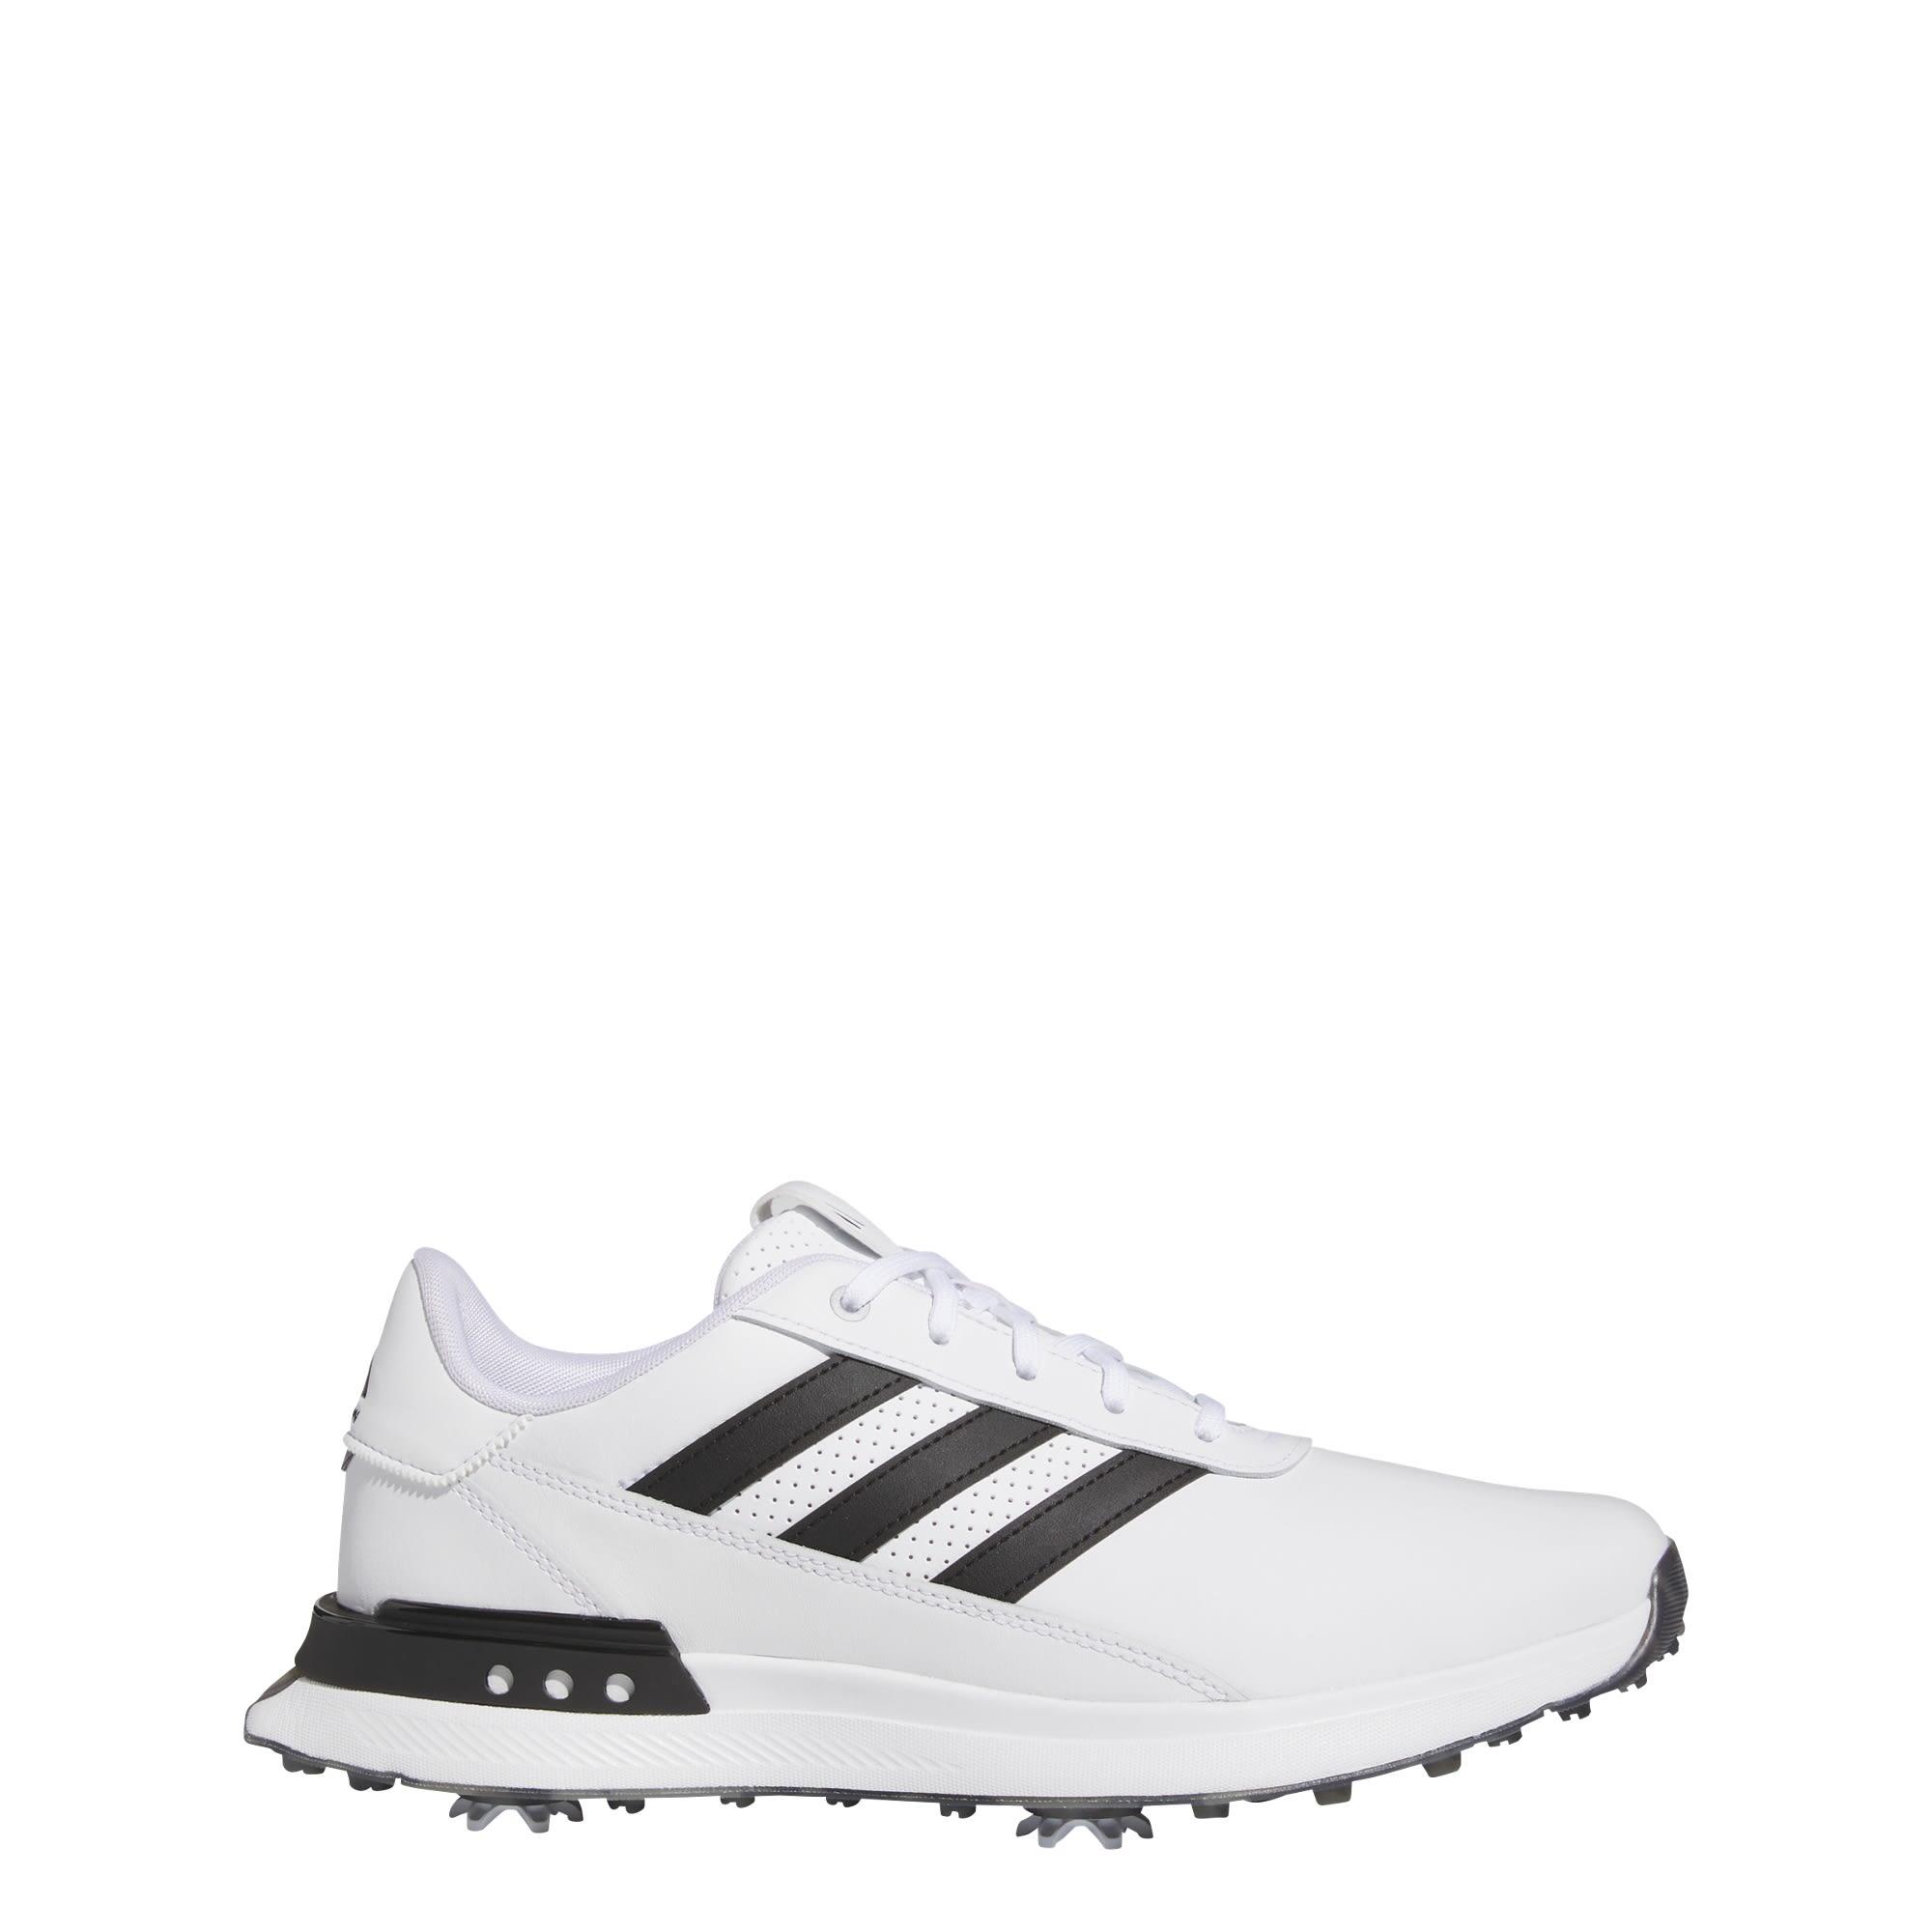 ADIDAS S2G 24 Golf Shoes